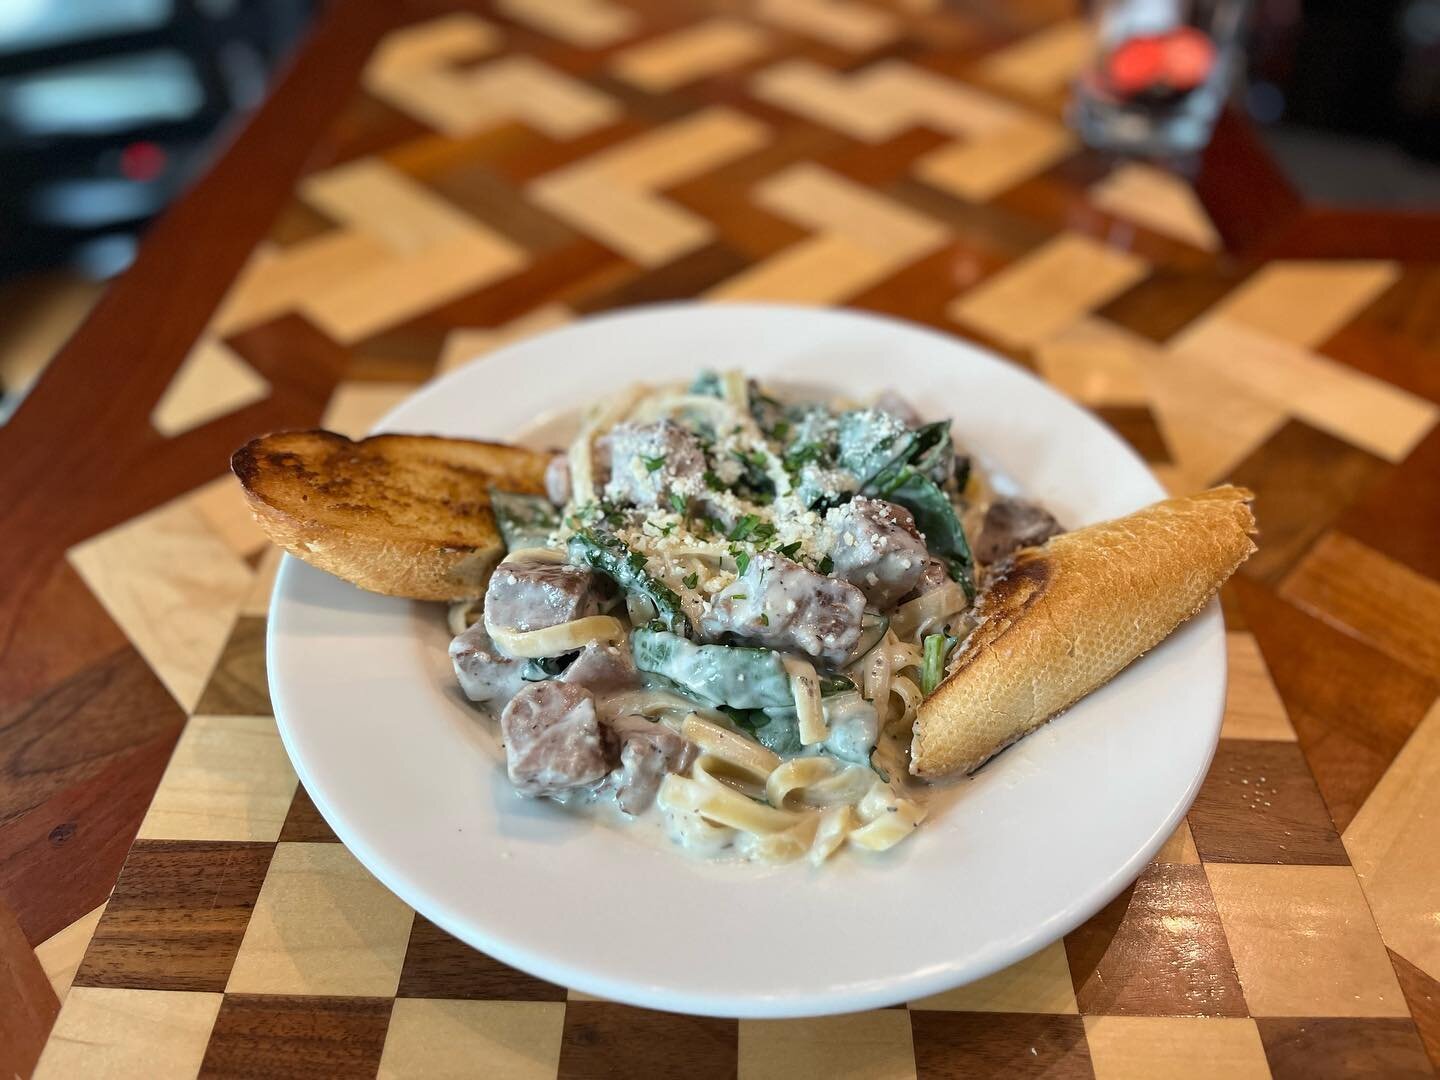 Our lunch special today is steak fettuccine 
alfredo with fresh spinach, Parmesan, garlic bread, &amp; parsley! Soup of the day is chili! PLUS GRAB AND GO LUNCHES! We&rsquo;ll see you for lunch today at Good Fellows!